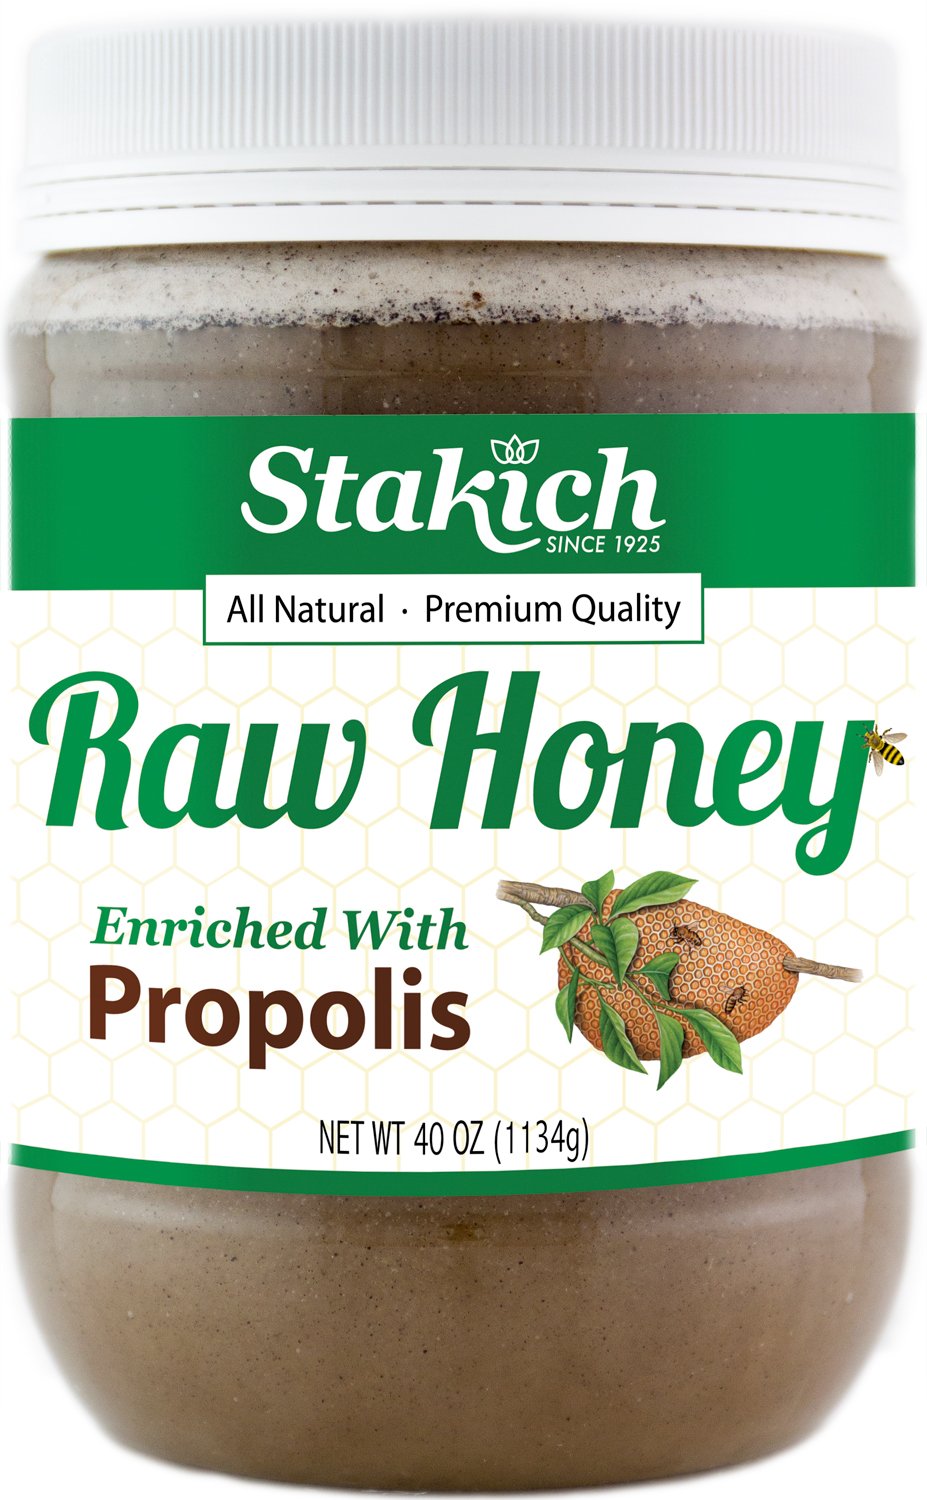 Stakich Propolis Enriched Raw Honey - 40 Ounce - Pure, Unprocessed, Unheated